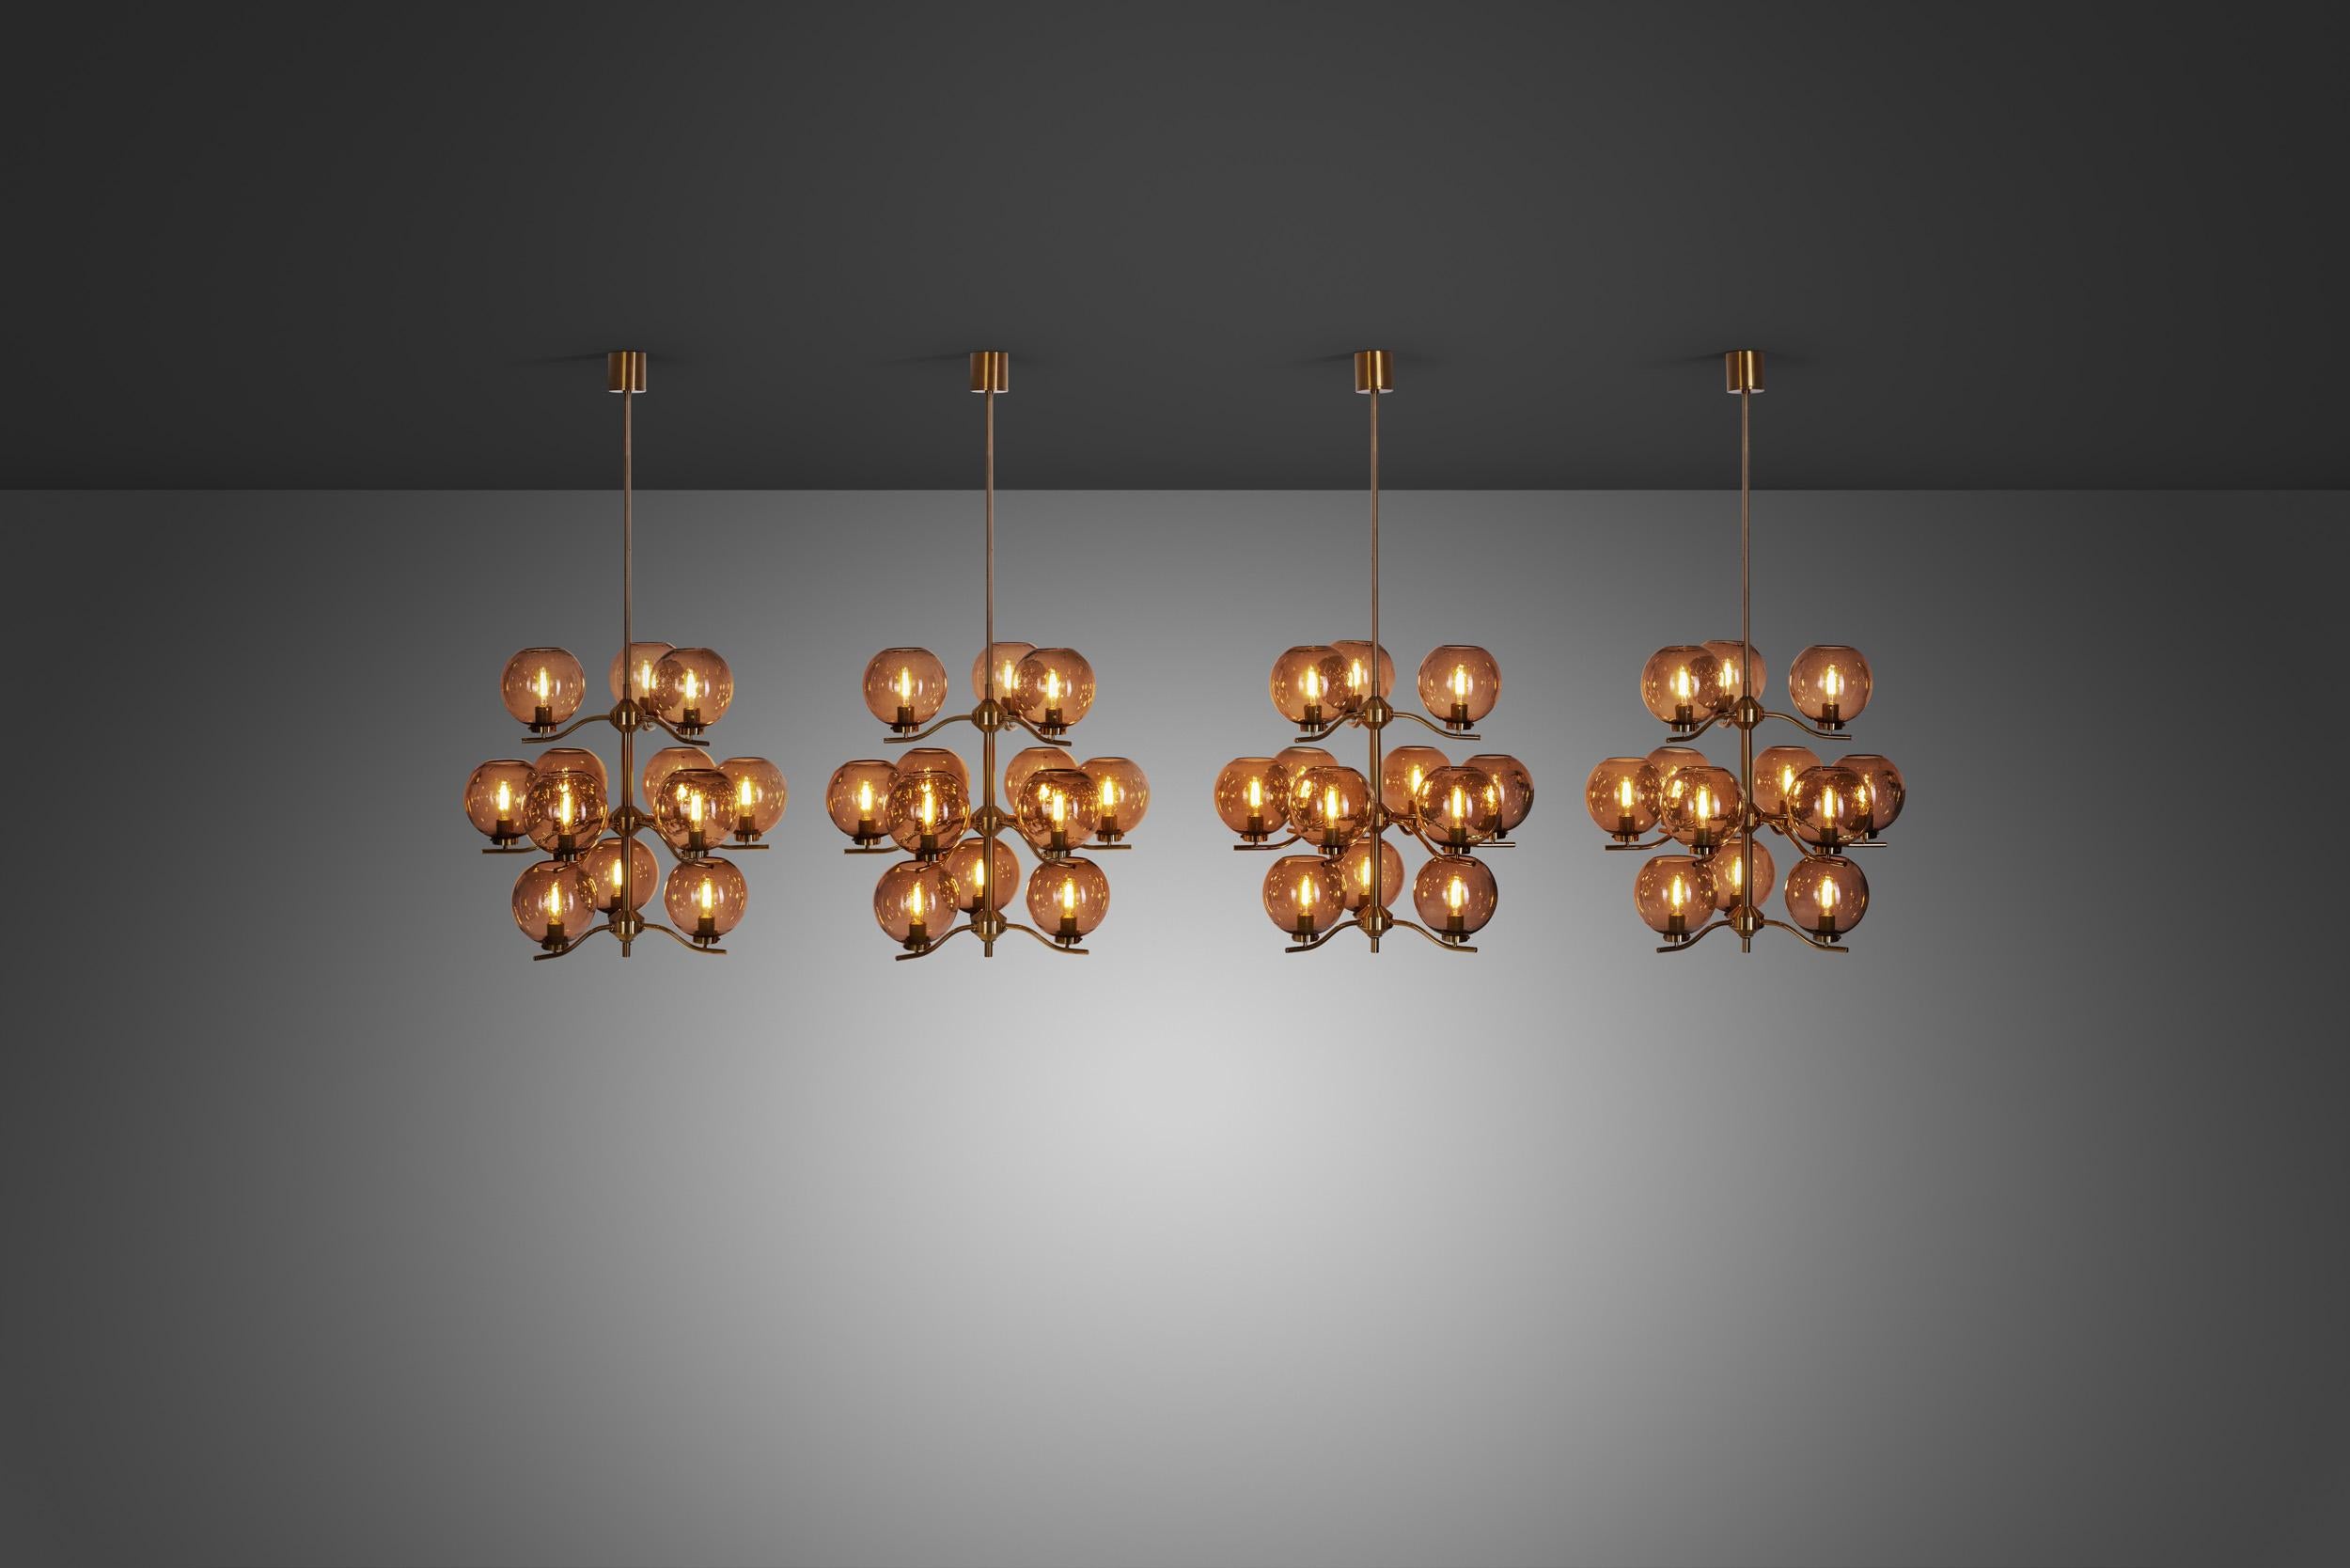 These marvellous chandeliers are a rarity from Swedish designer, Holger Johansson, who created them for his own company, Westal. With a brass frame holding 12 translucent bubble glass shades, grandiose and stylish are the words to describe these